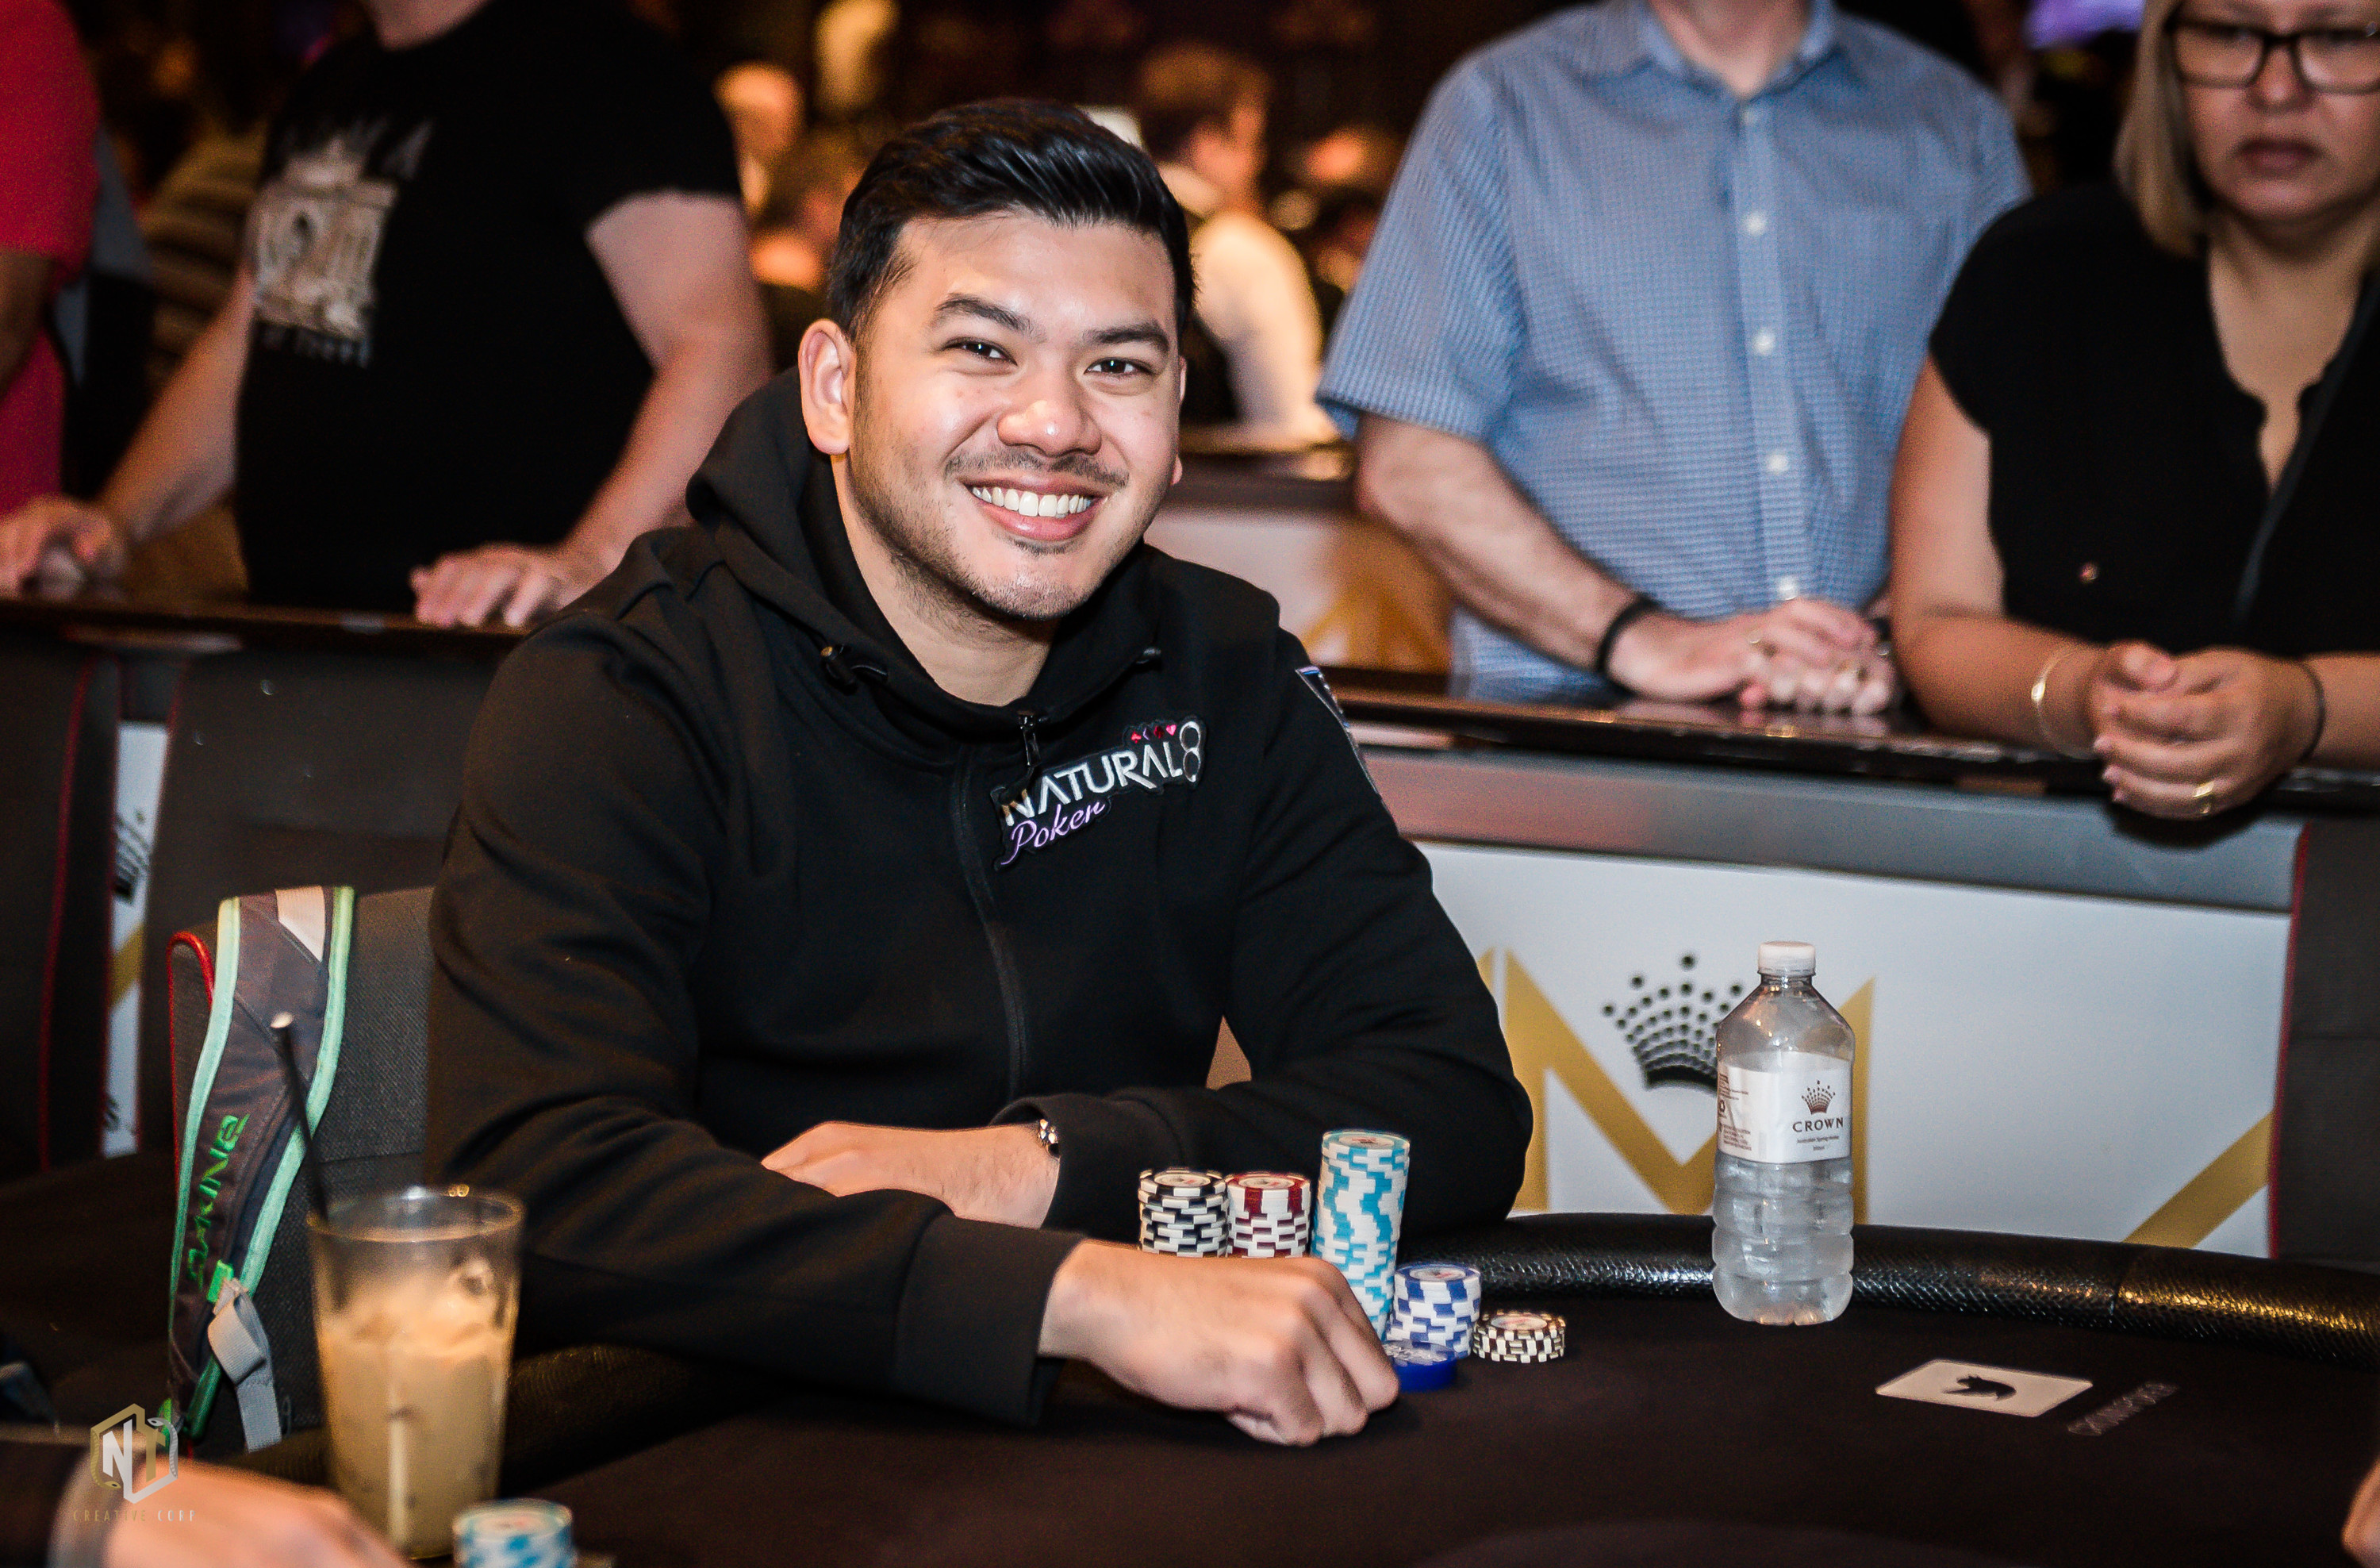 “There Are Two Varieties of Starter Poker Gamers” says Natural8 Ambassador Michael Soyza